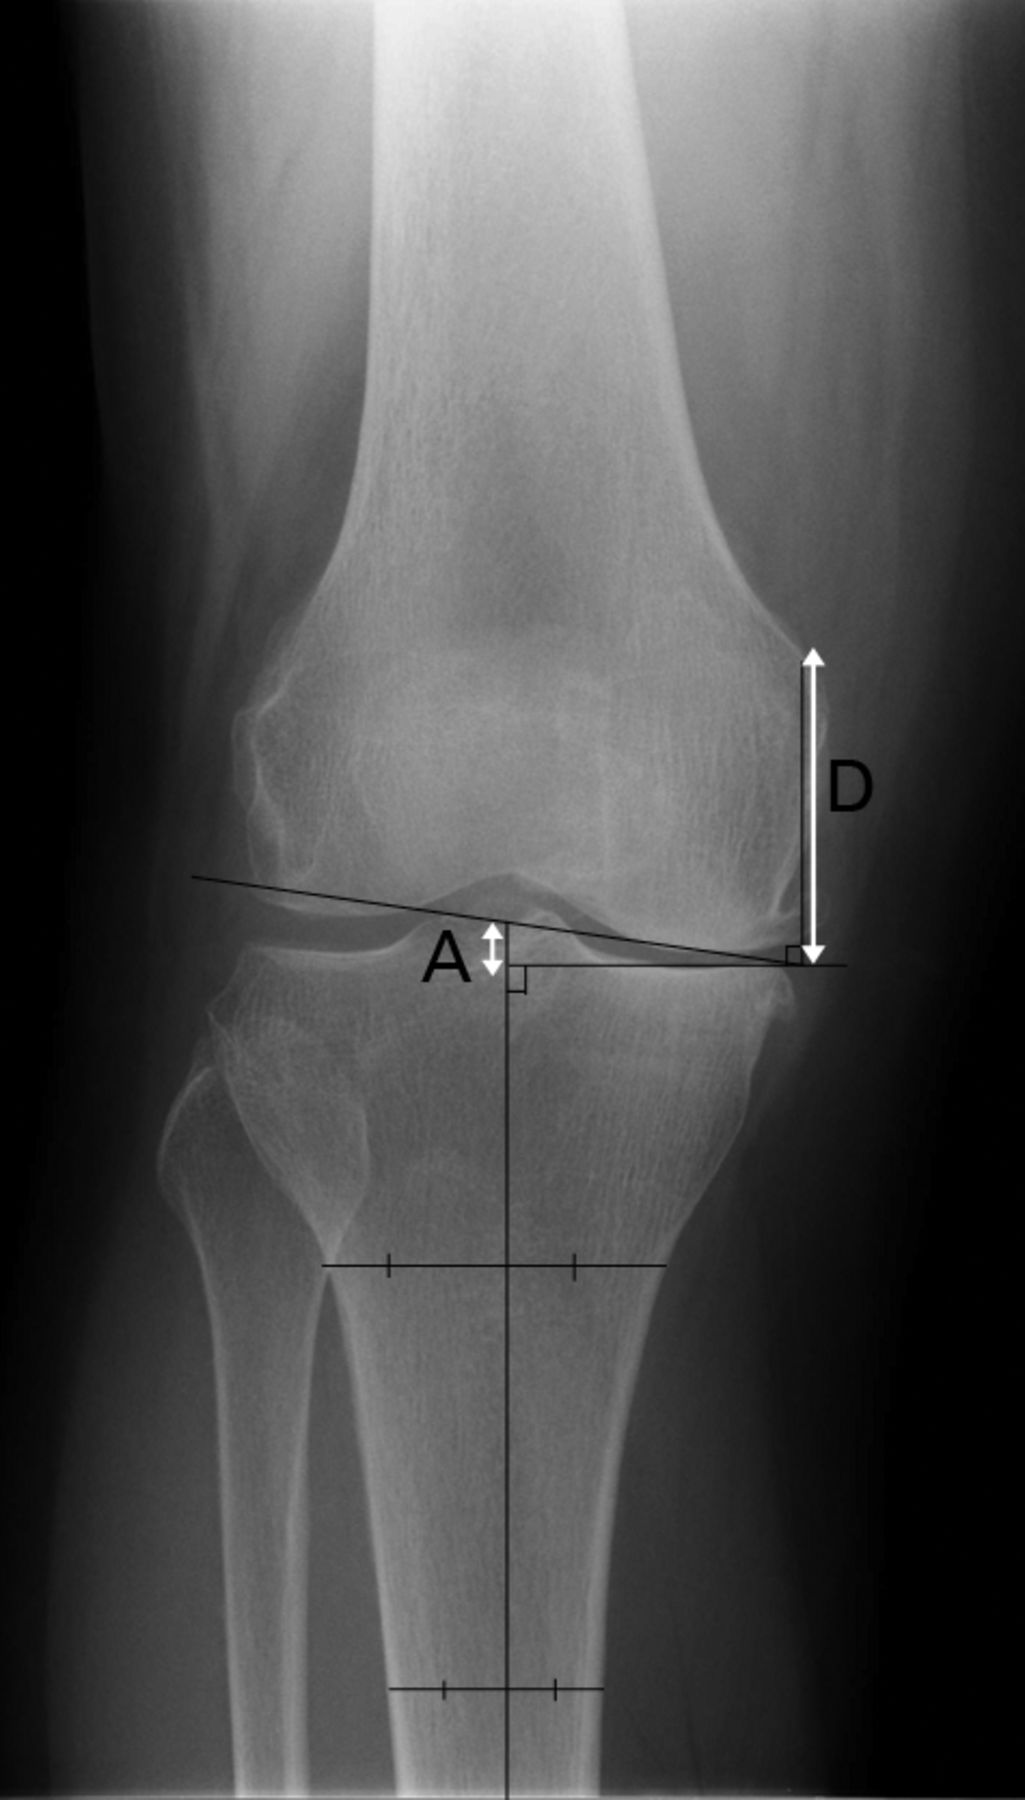 Figs. 1a - 1b 
            Pre-operative anteroposterior
radiographs showing a) the distance between the adductor tubercle
as the distal point on the medial condylar slope of the femur and
the joint line (line D) and b) the depth of resection was defined
as differences between distance A and distance B. Line C was the
thickness of the tibial insert used to correct magnification.
          